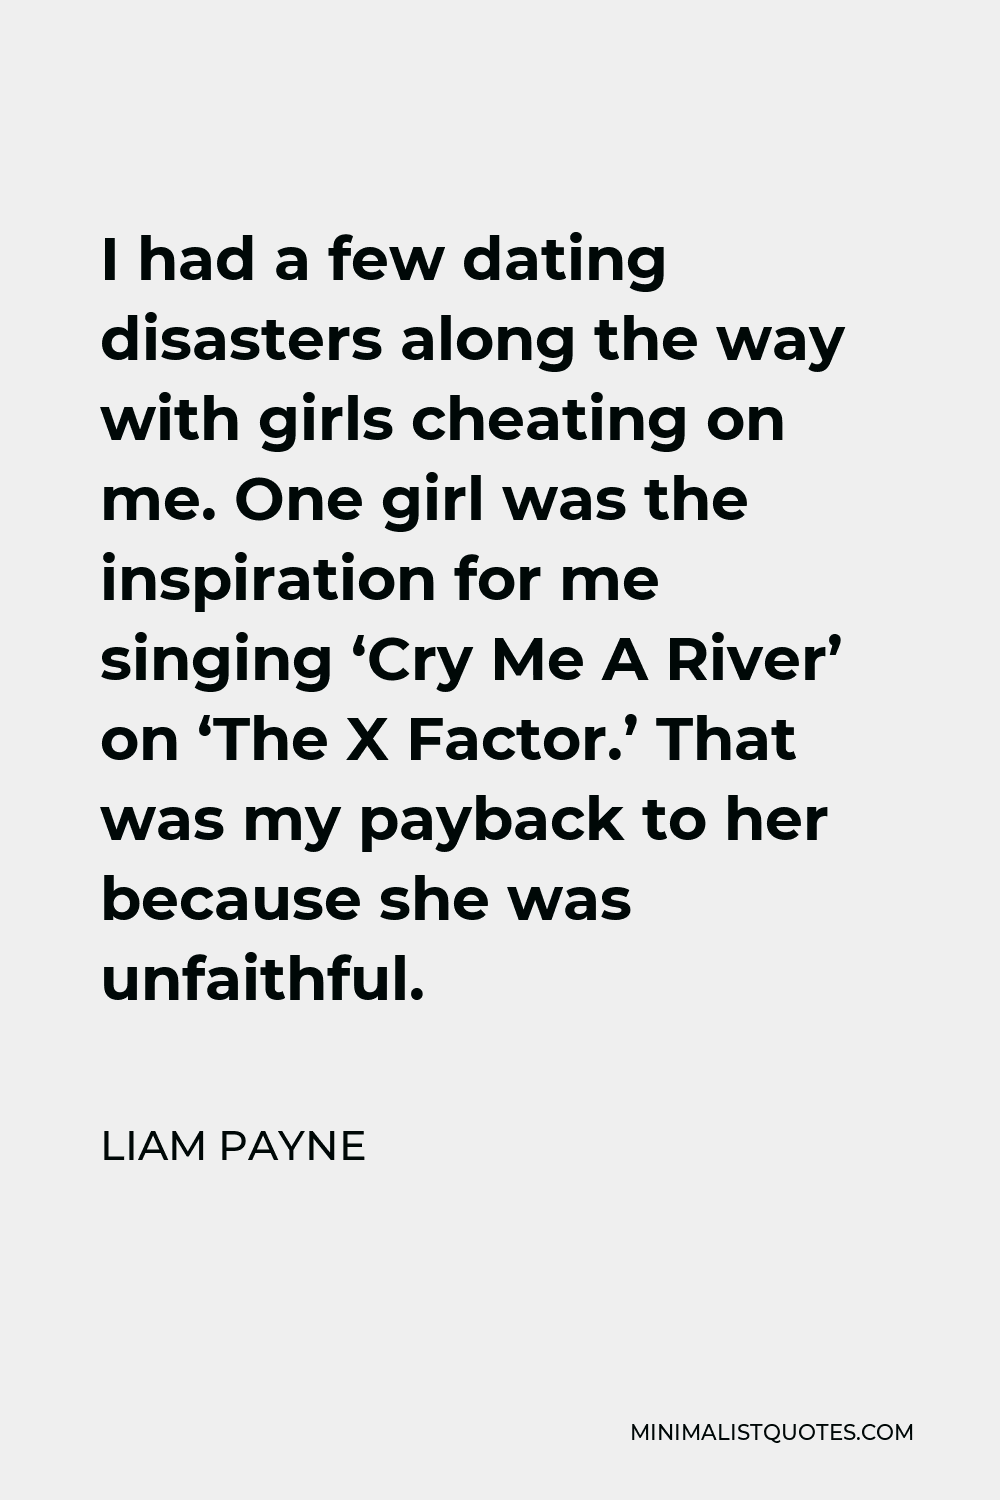 Liam Payne Quote - I had a few dating disasters along the way with girls cheating on me. One girl was the inspiration for me singing ‘Cry Me A River’ on ‘The X Factor.’ That was my payback to her because she was unfaithful.